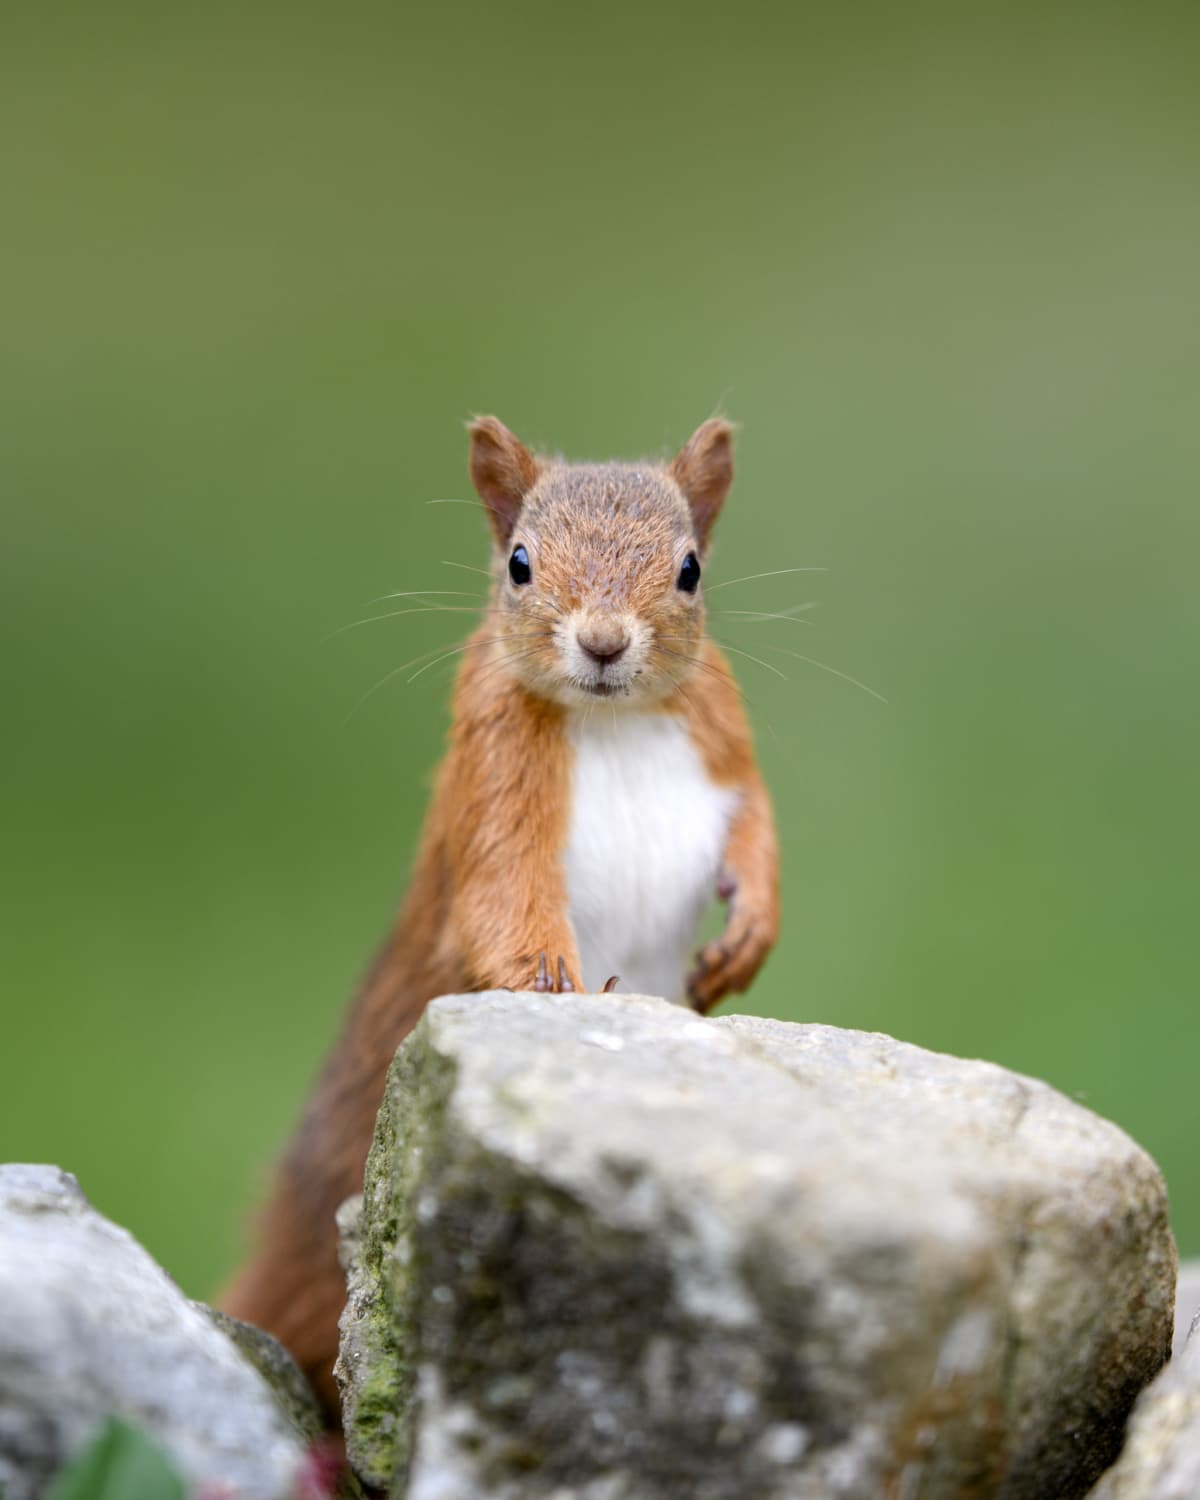 Eurasian red squirrel leaning on stones